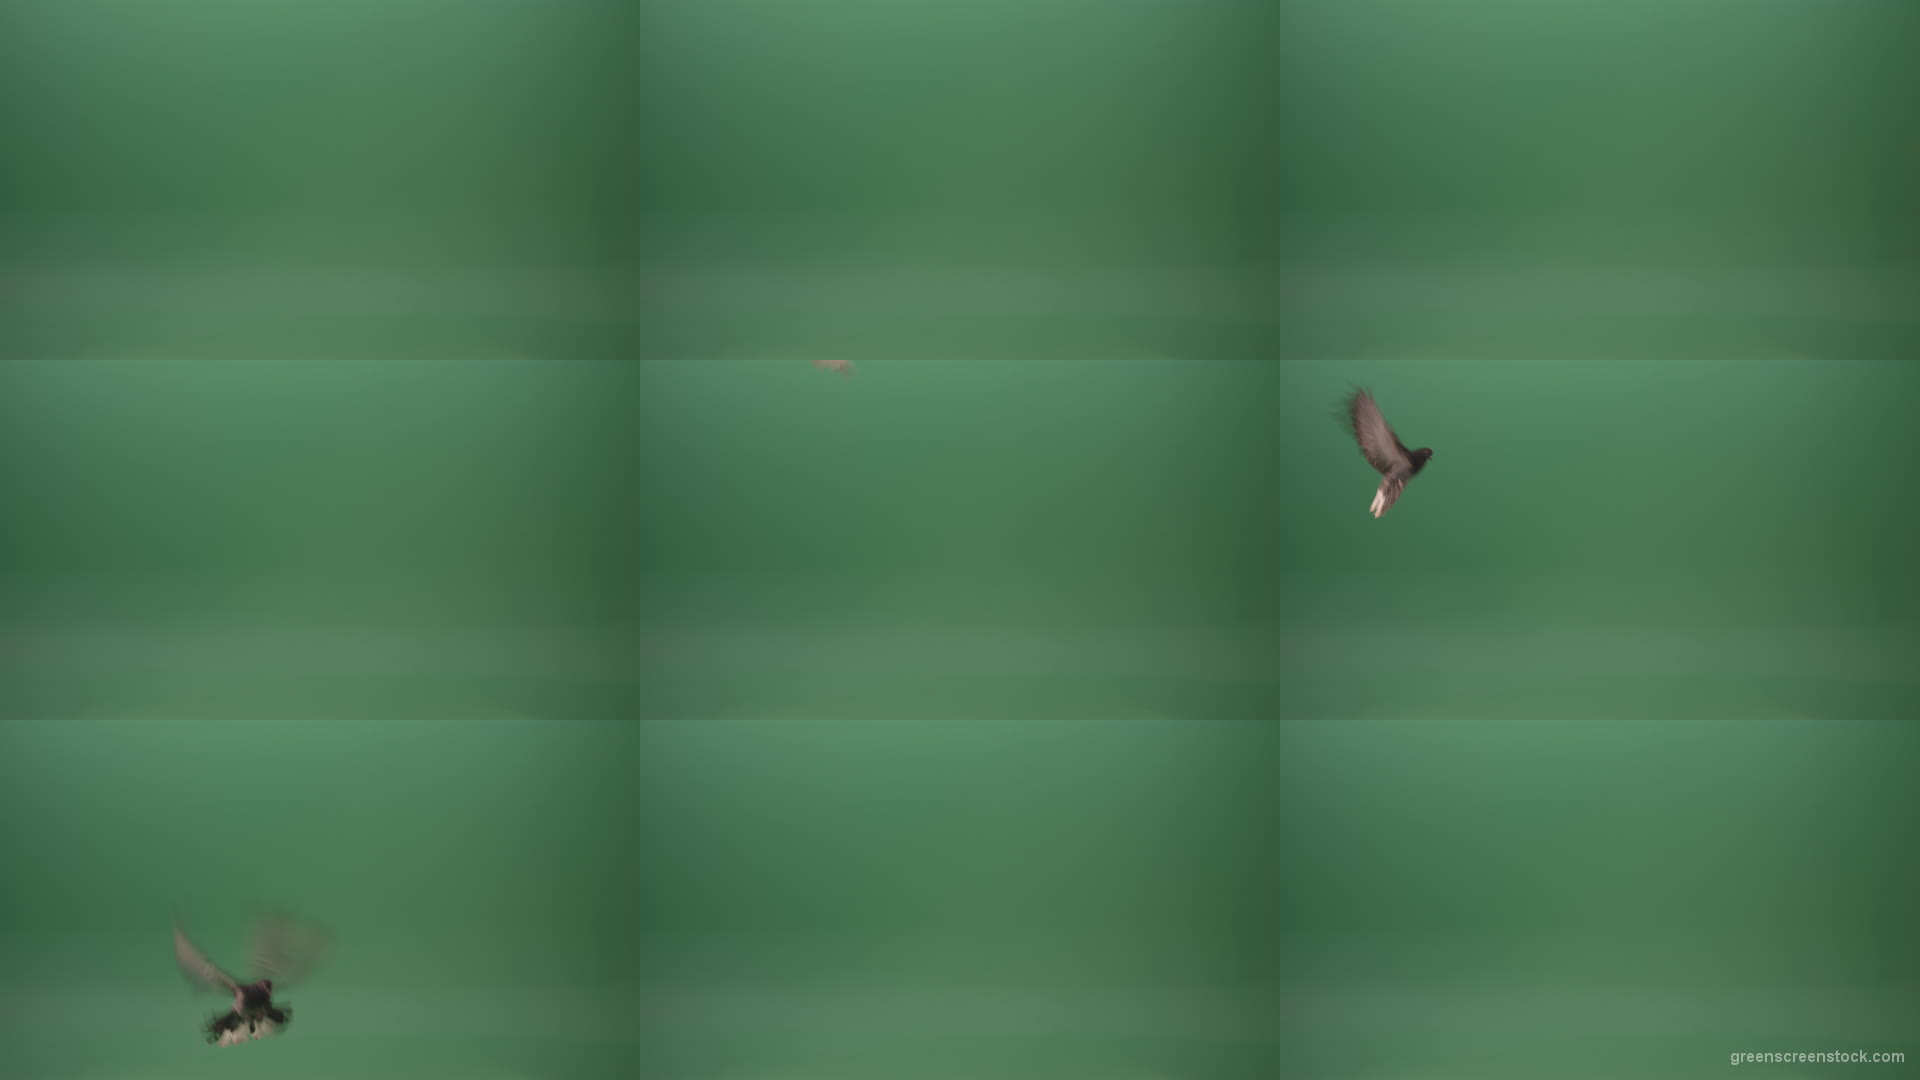 Great-flight-of-blue-bird-breed-of-pigeons-isolated-on-green-screen Green Screen Stock